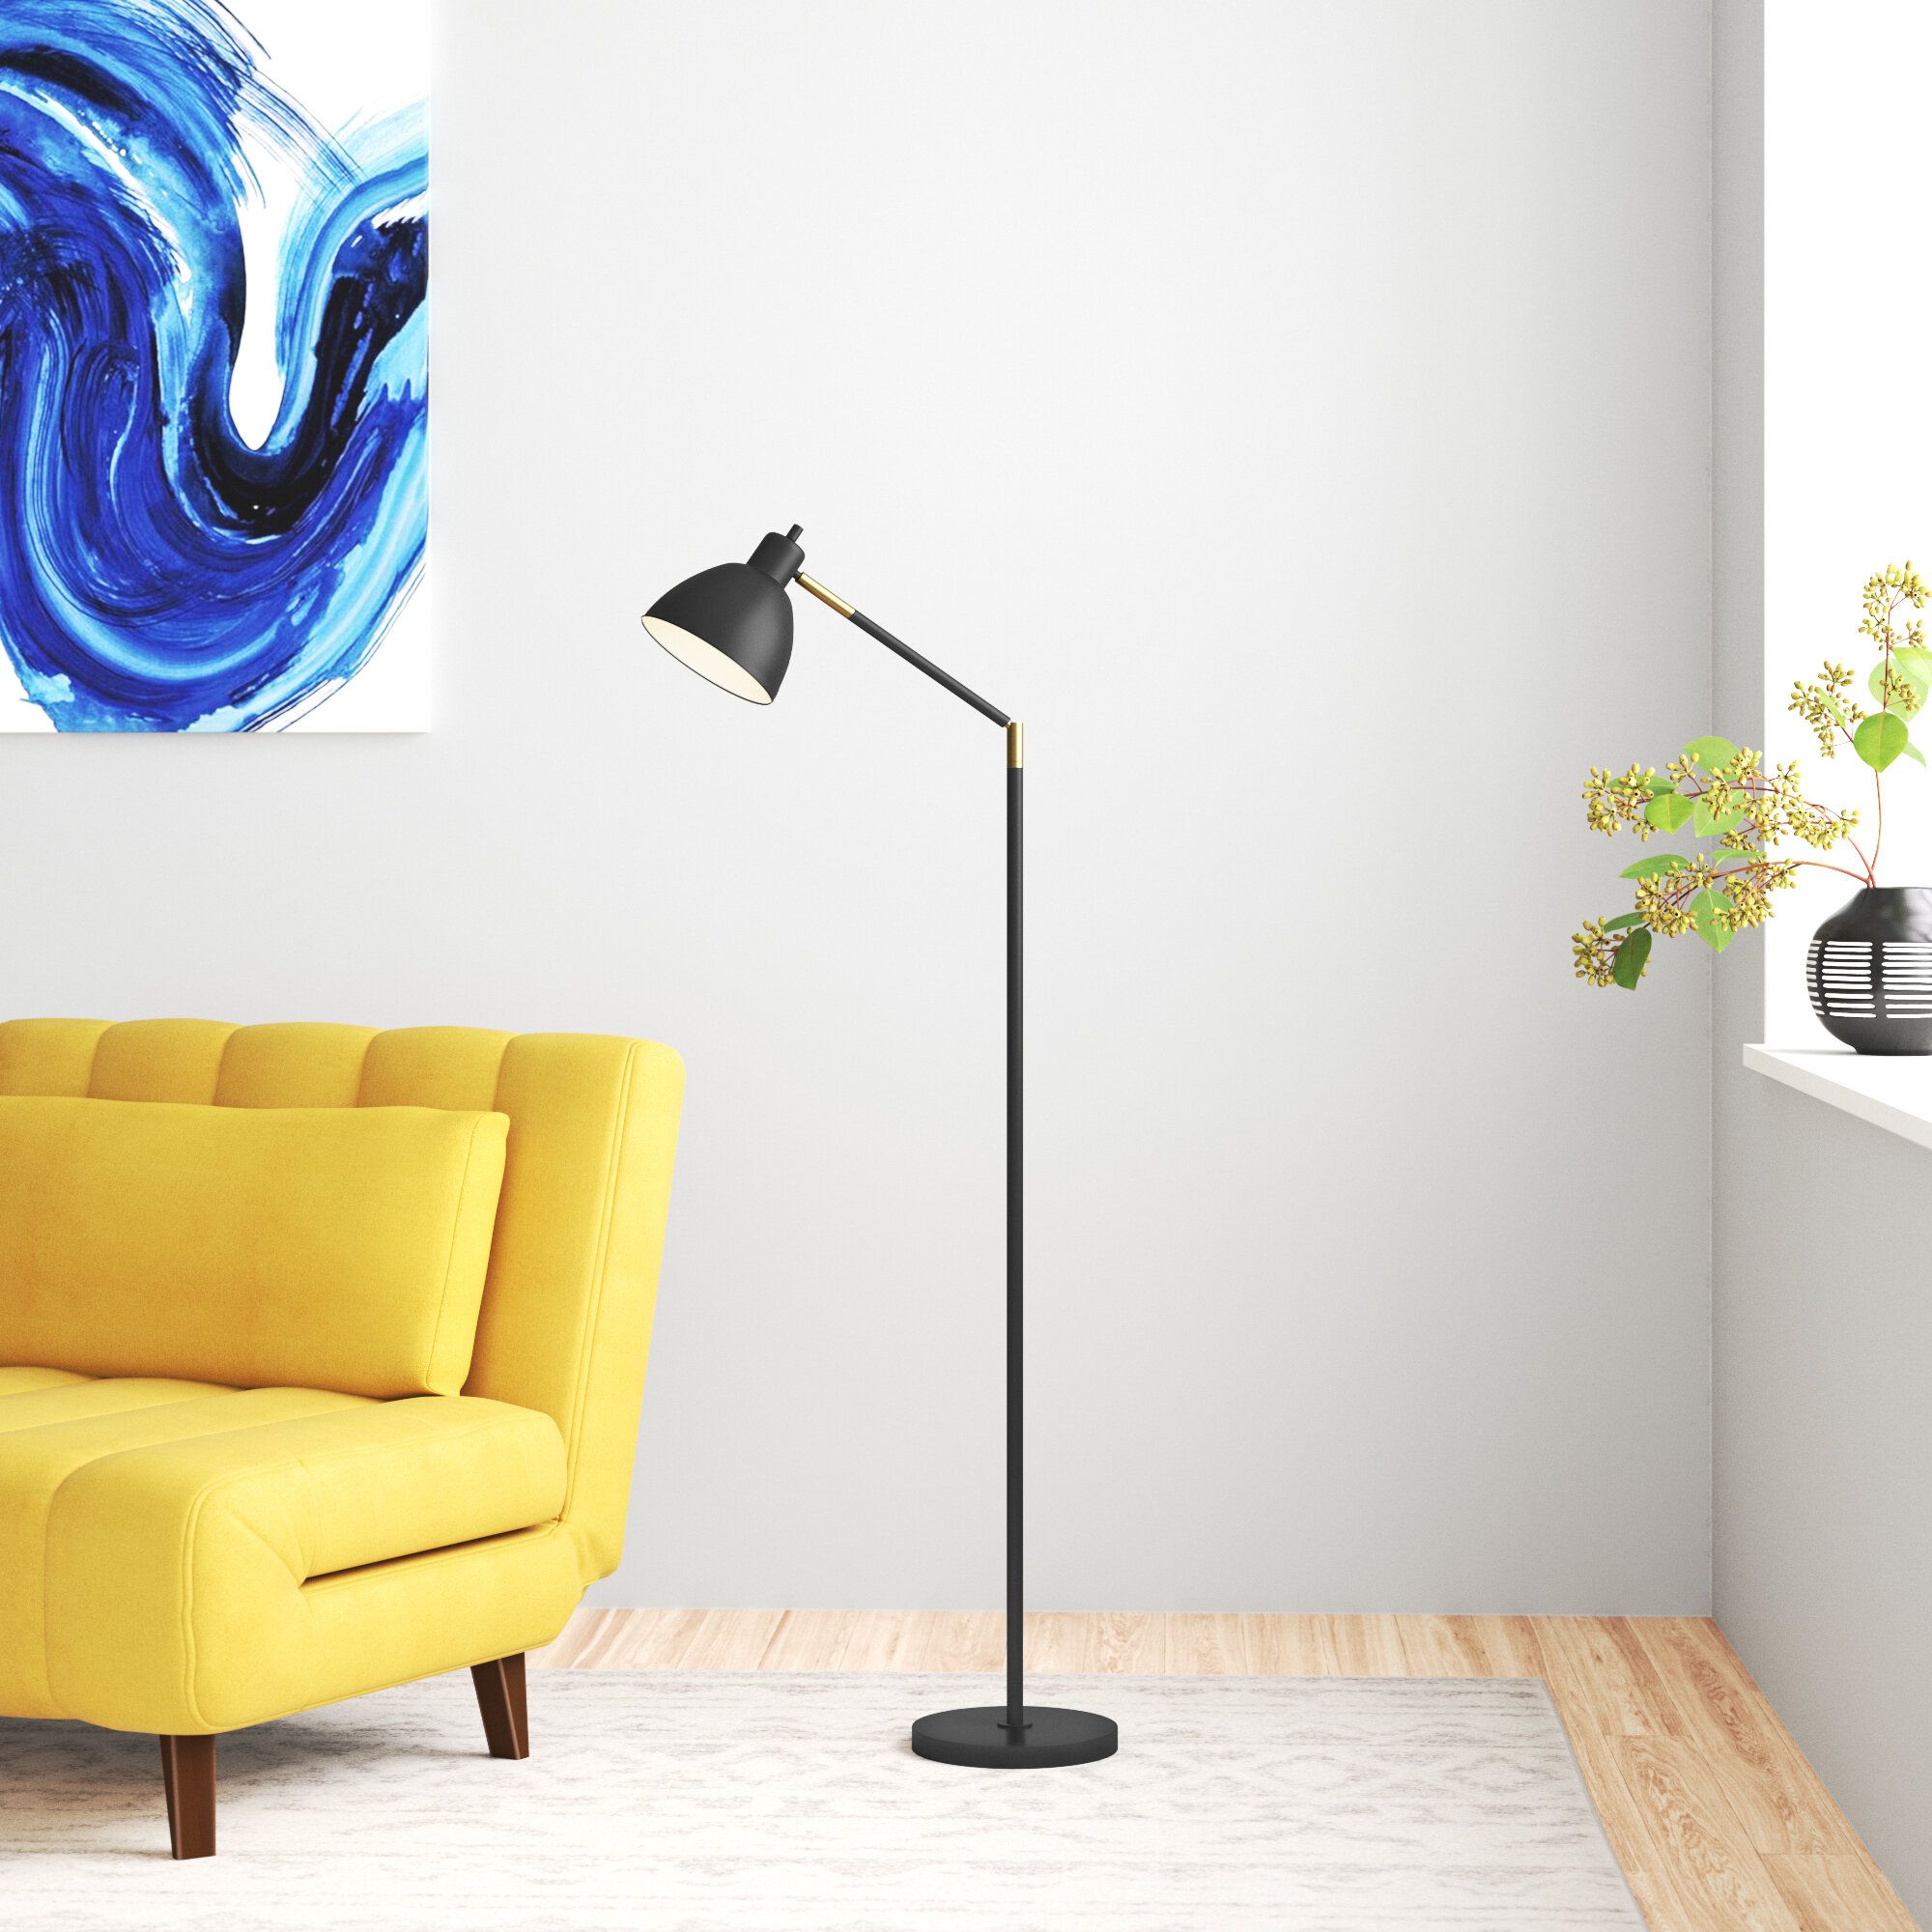 Wayfair | Cone Shaped Floor Lamps You'll Love In 2023 Intended For Cone Floor Lamps (View 11 of 15)